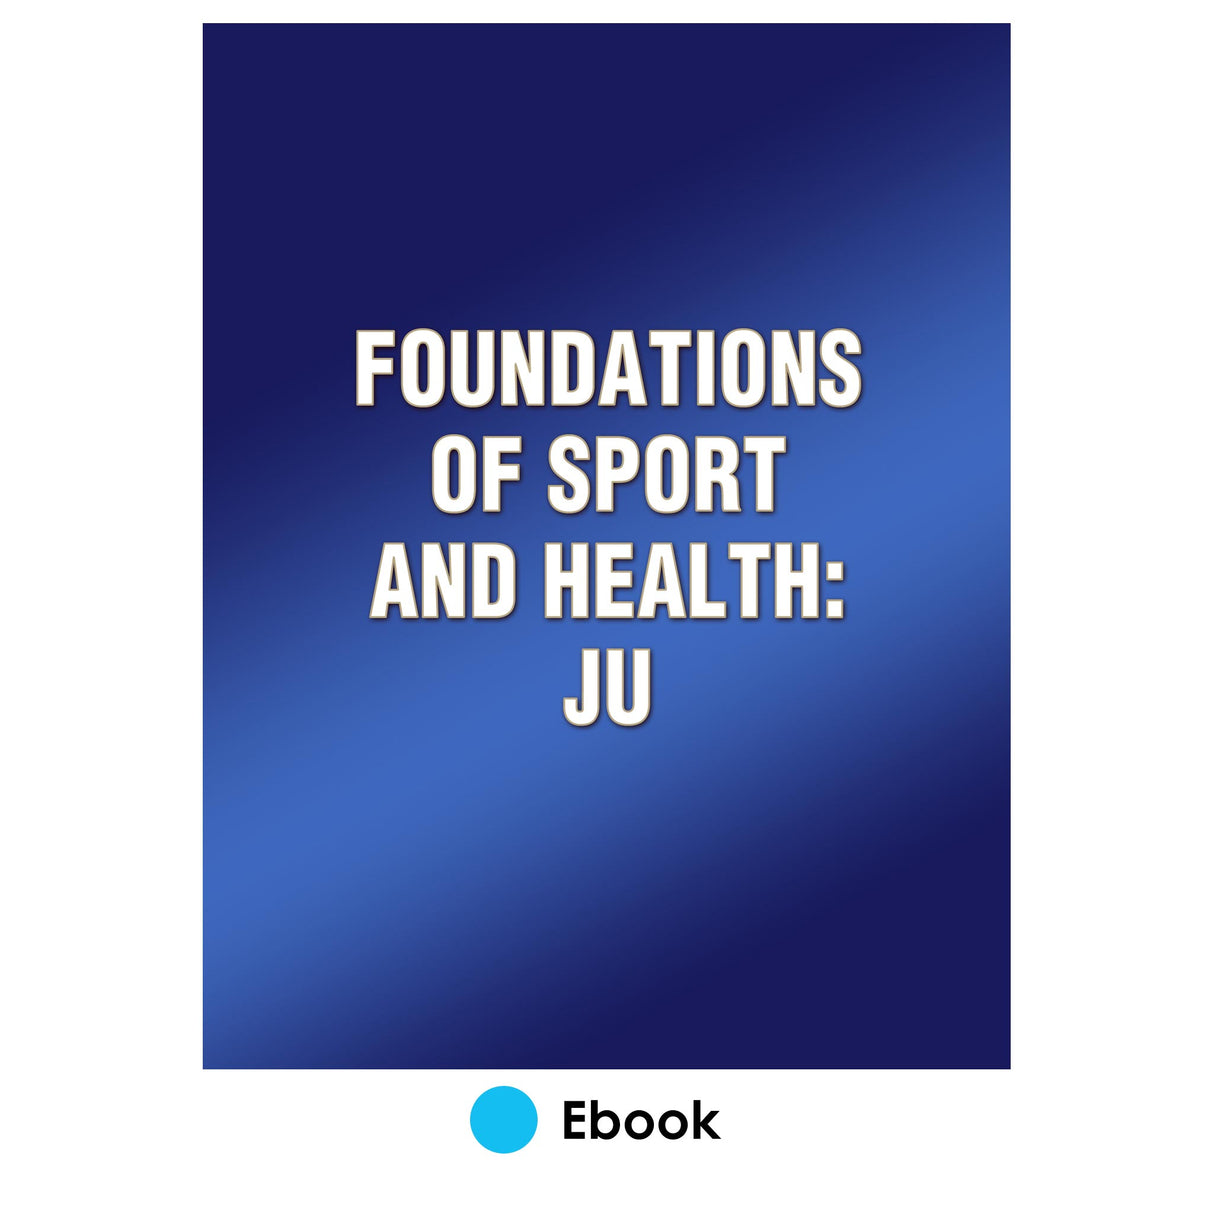 Foundations of Sport and Health: JU